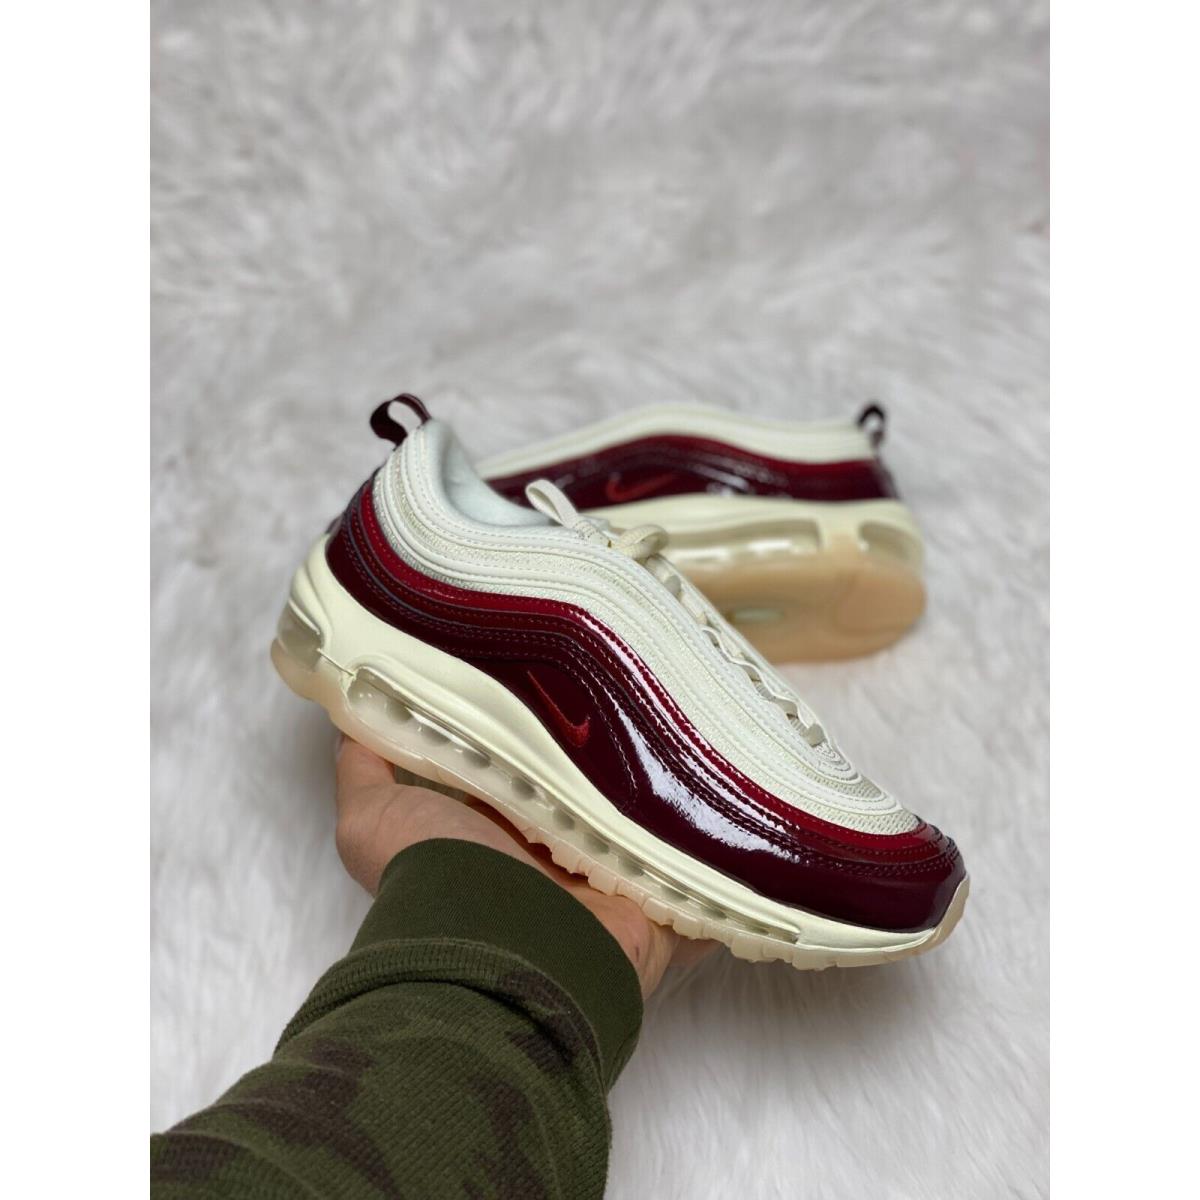 Nike Air Max 97 Dark Beetroot Womens Shoes White Red DQ8582-600 Multi Sz